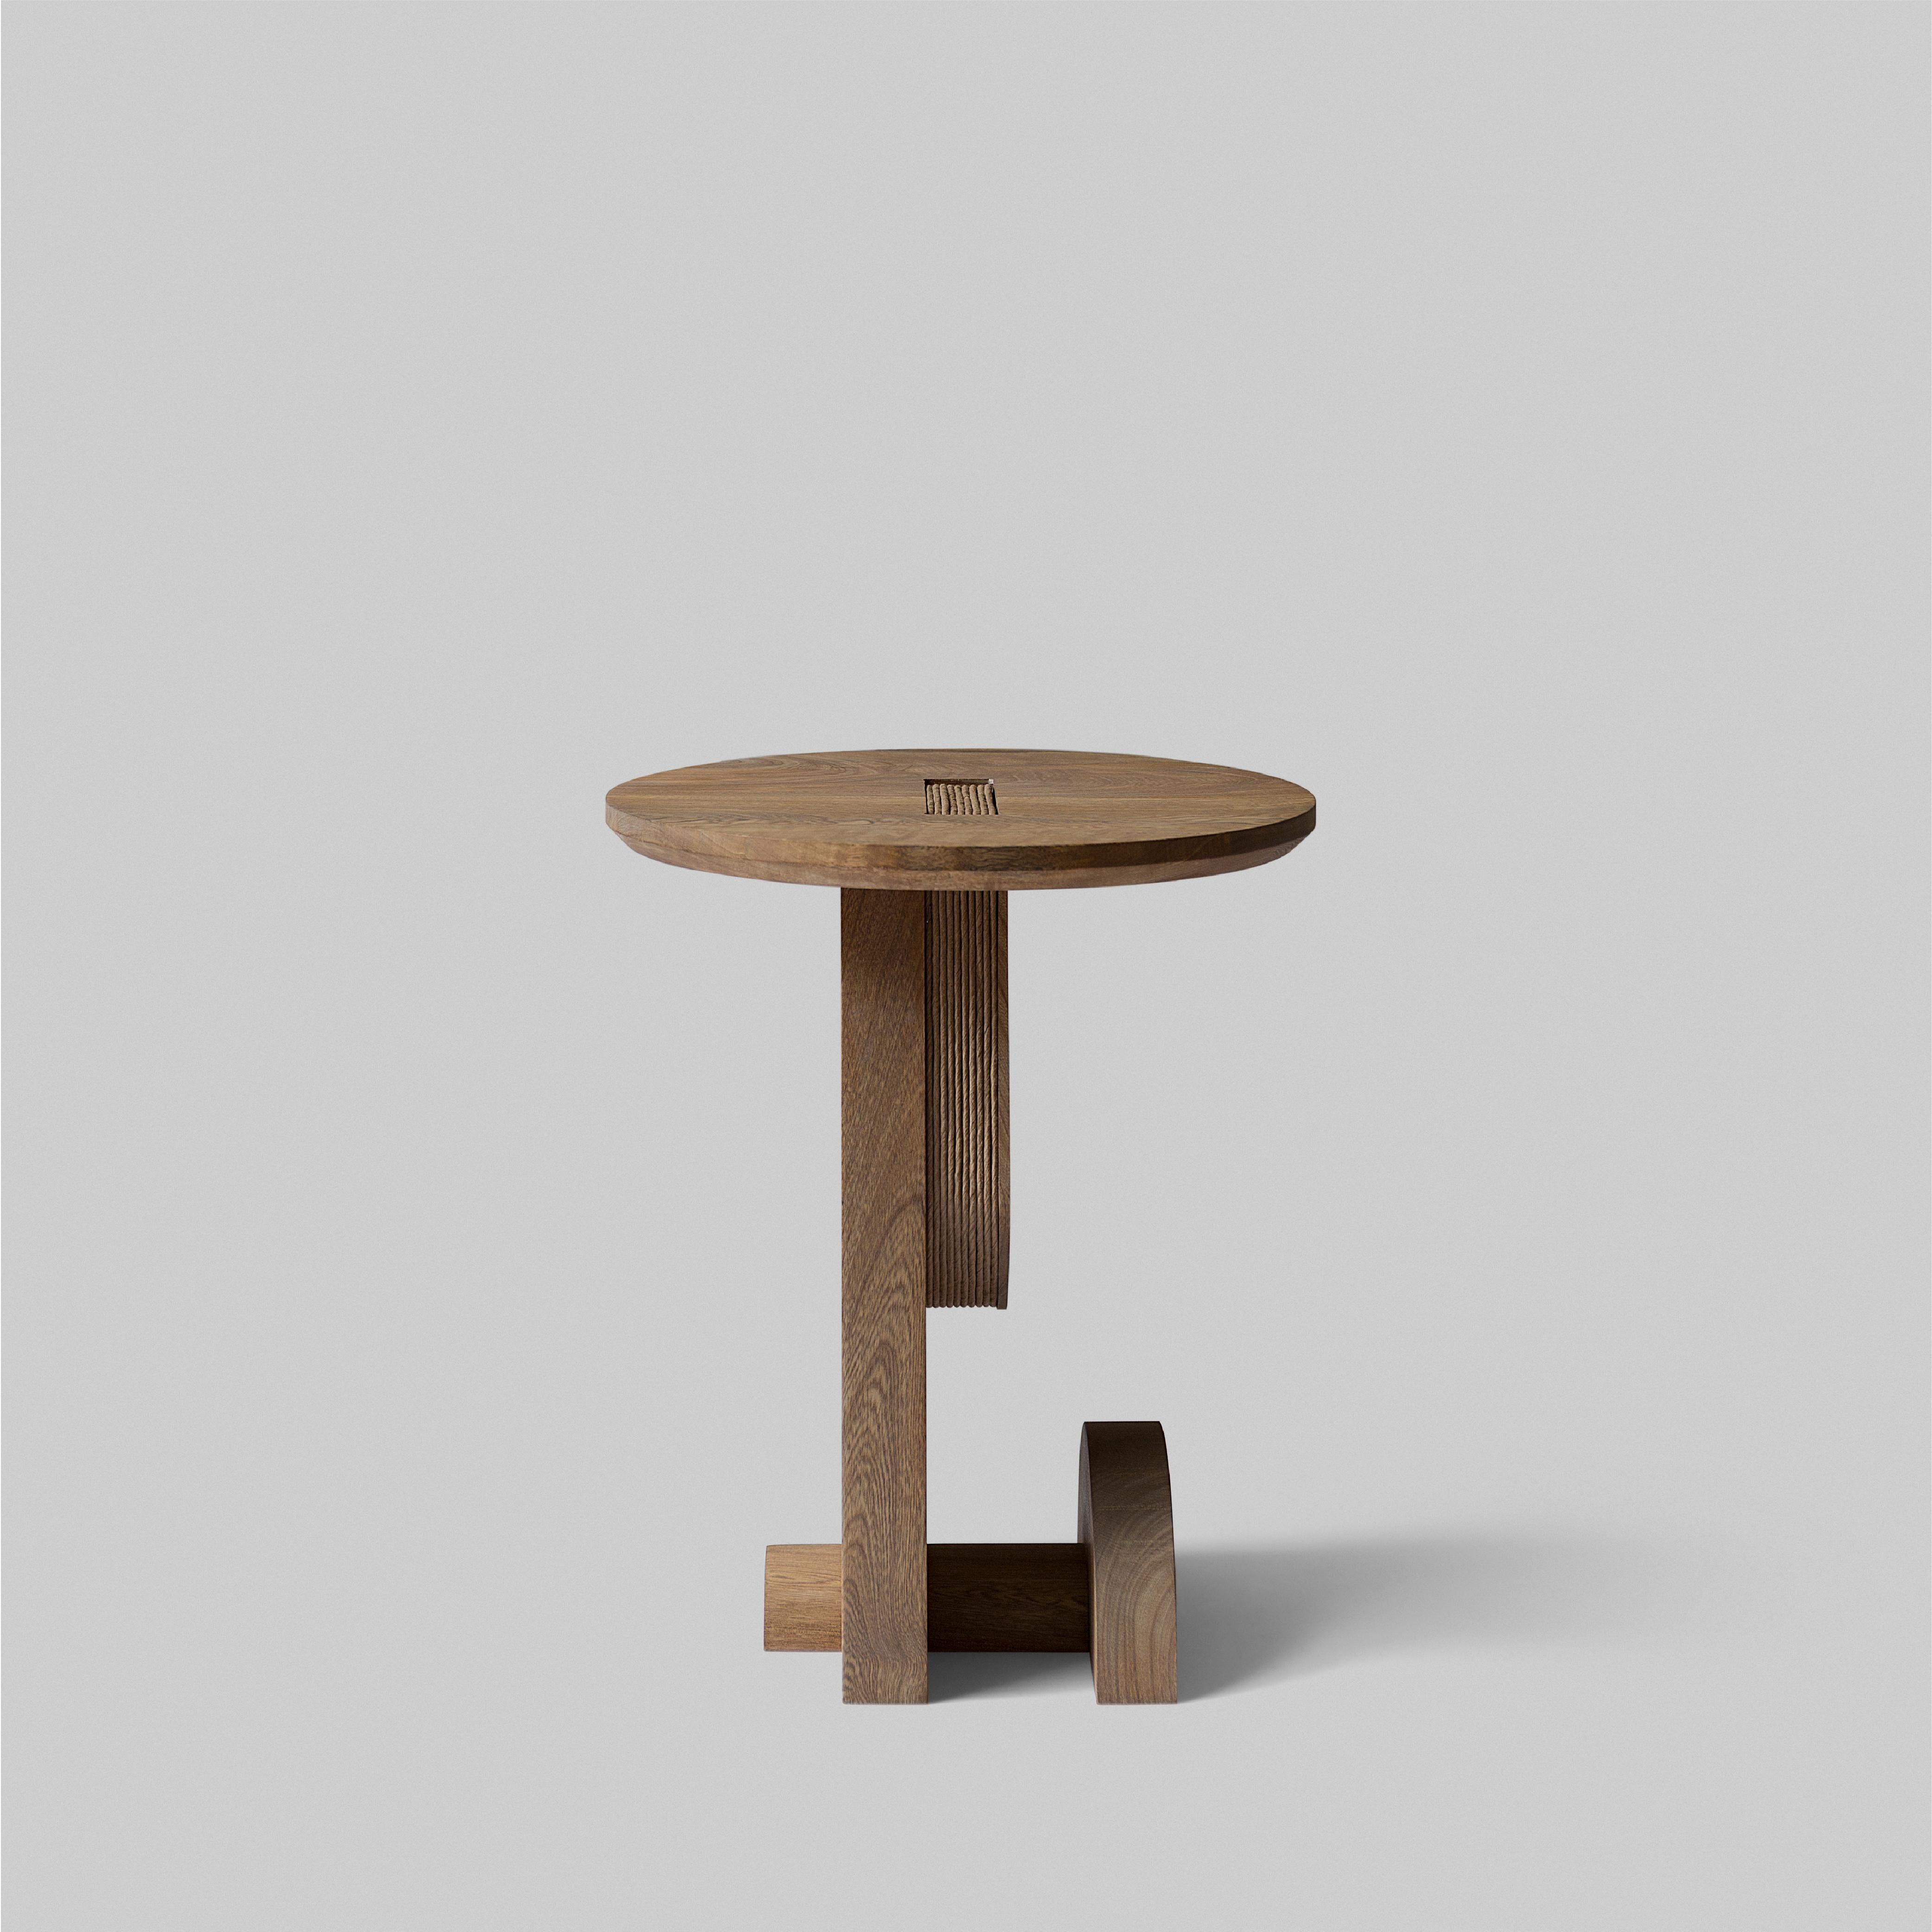 Hand-Crafted Basurto 03 Contemporary Wooden Stool with Leather details For Sale